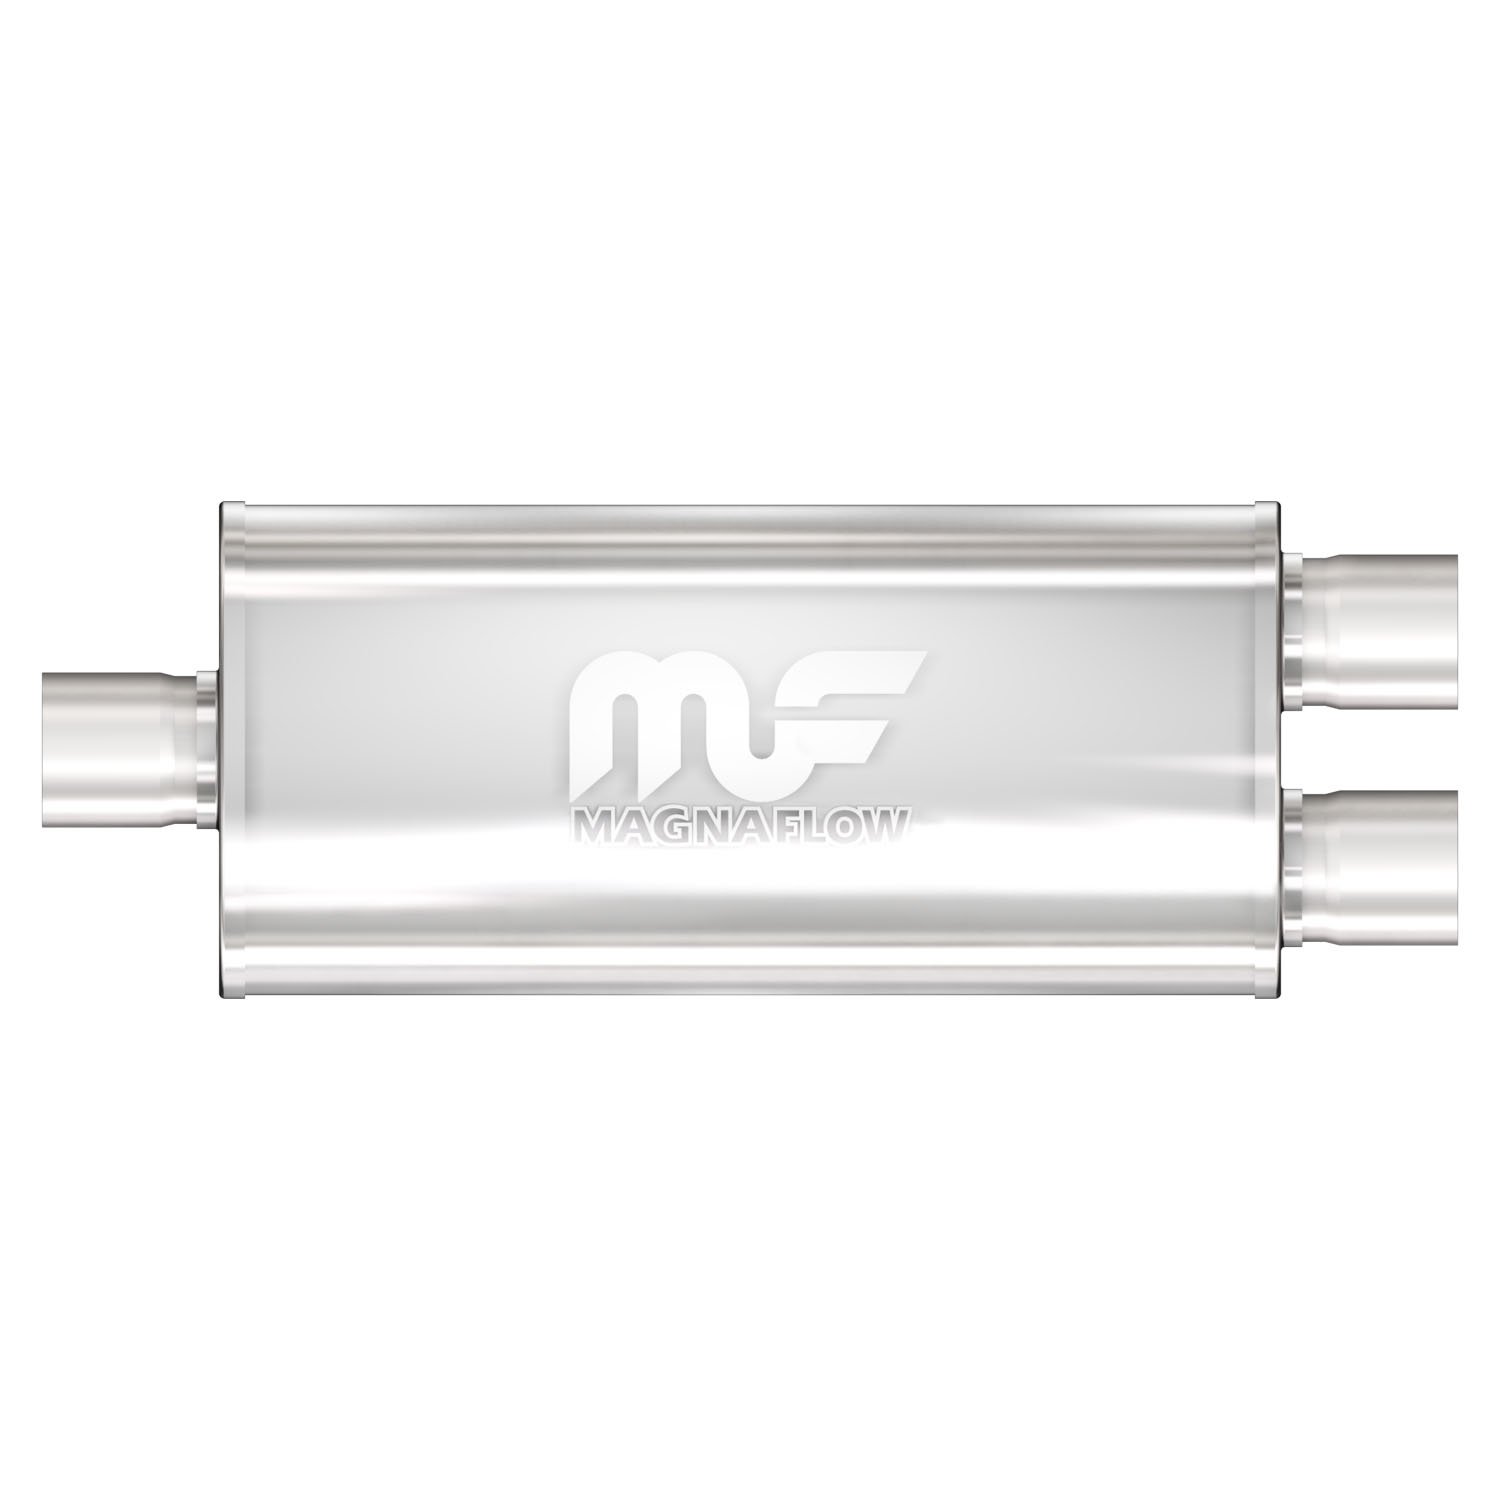 5" x 8" Oval Muffler Center In/Dual Out: 2.5" /2.5" Body Length: 14" Overall Length: 20" Core Size: 2.5" Polished Finish